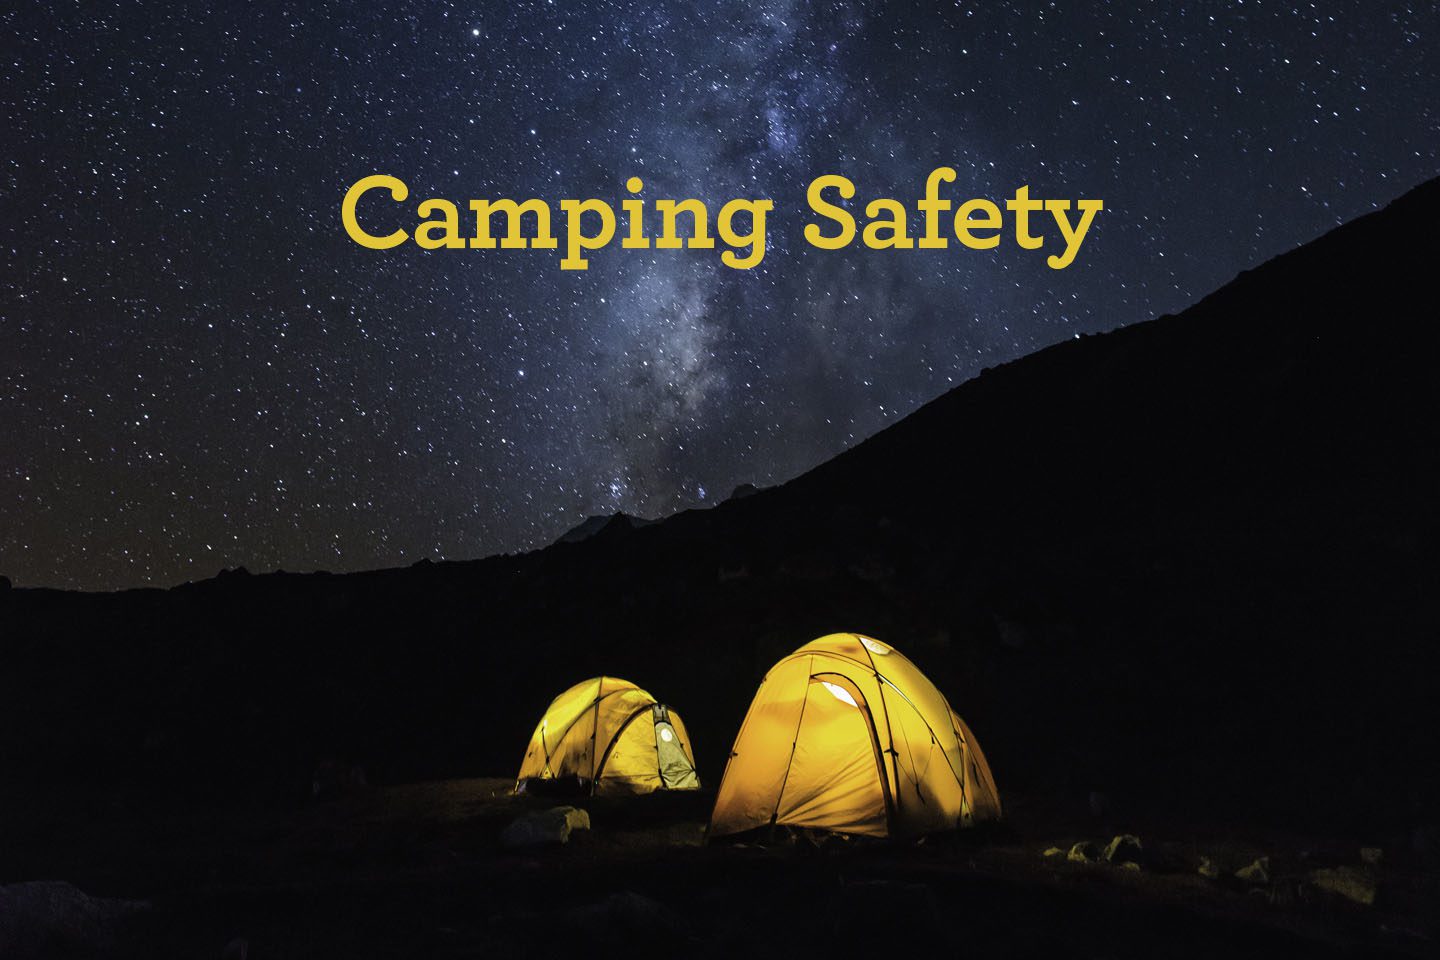 camping safety chattanooga yellow tents and starry sky